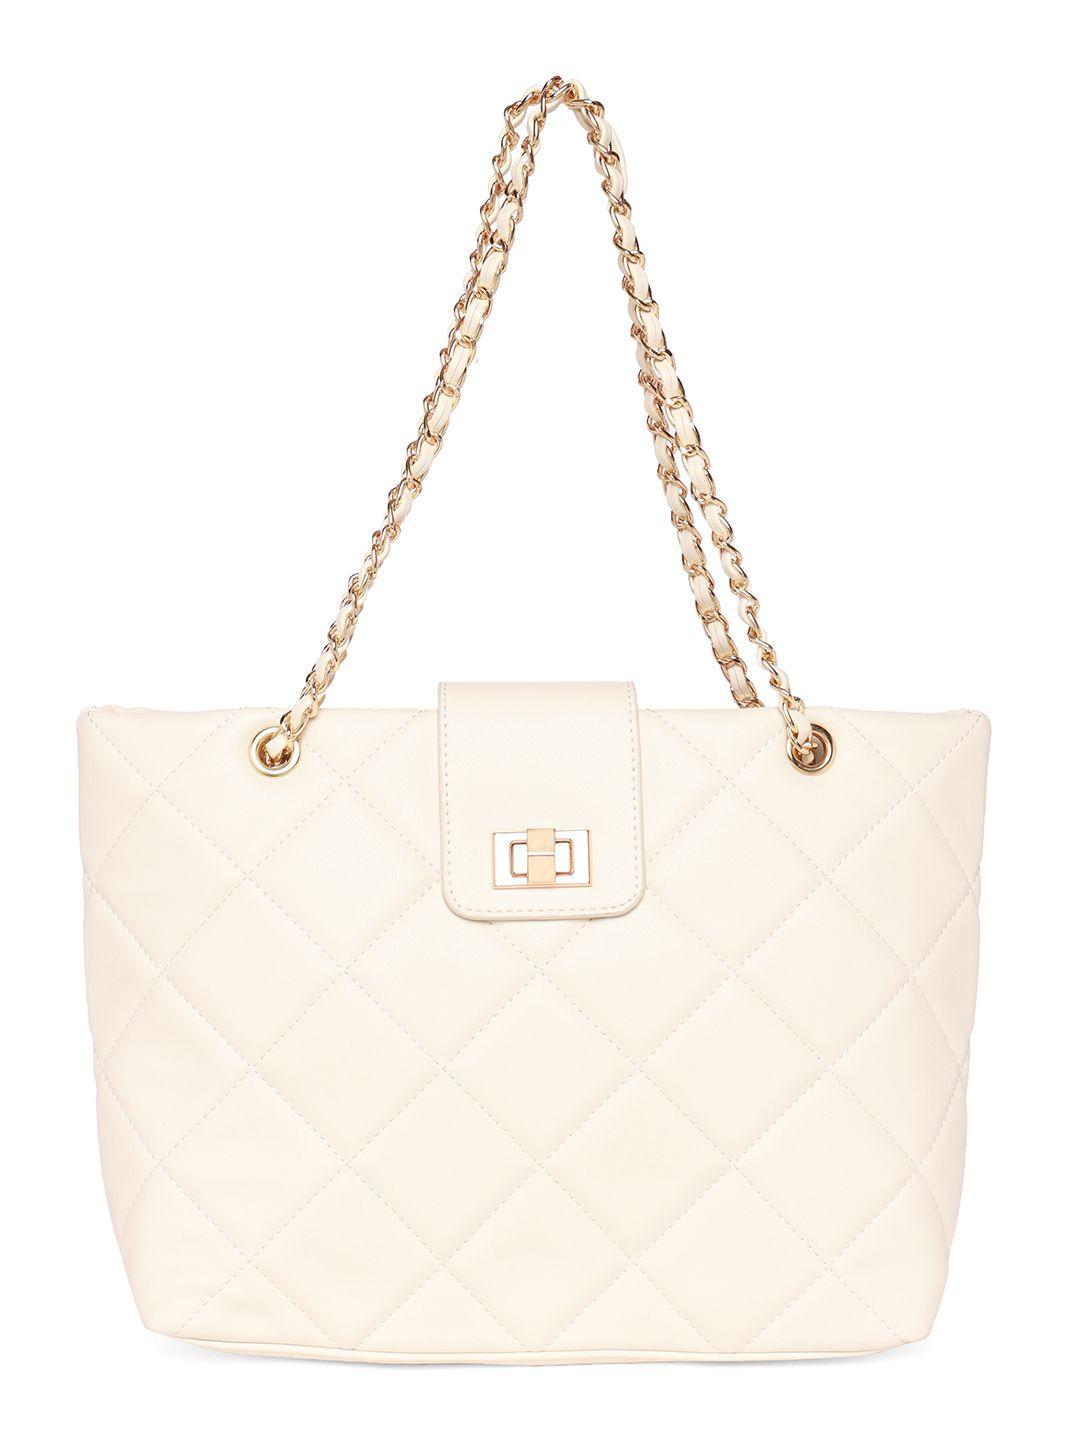 aldo textured structured shoulder bag with quilted detail